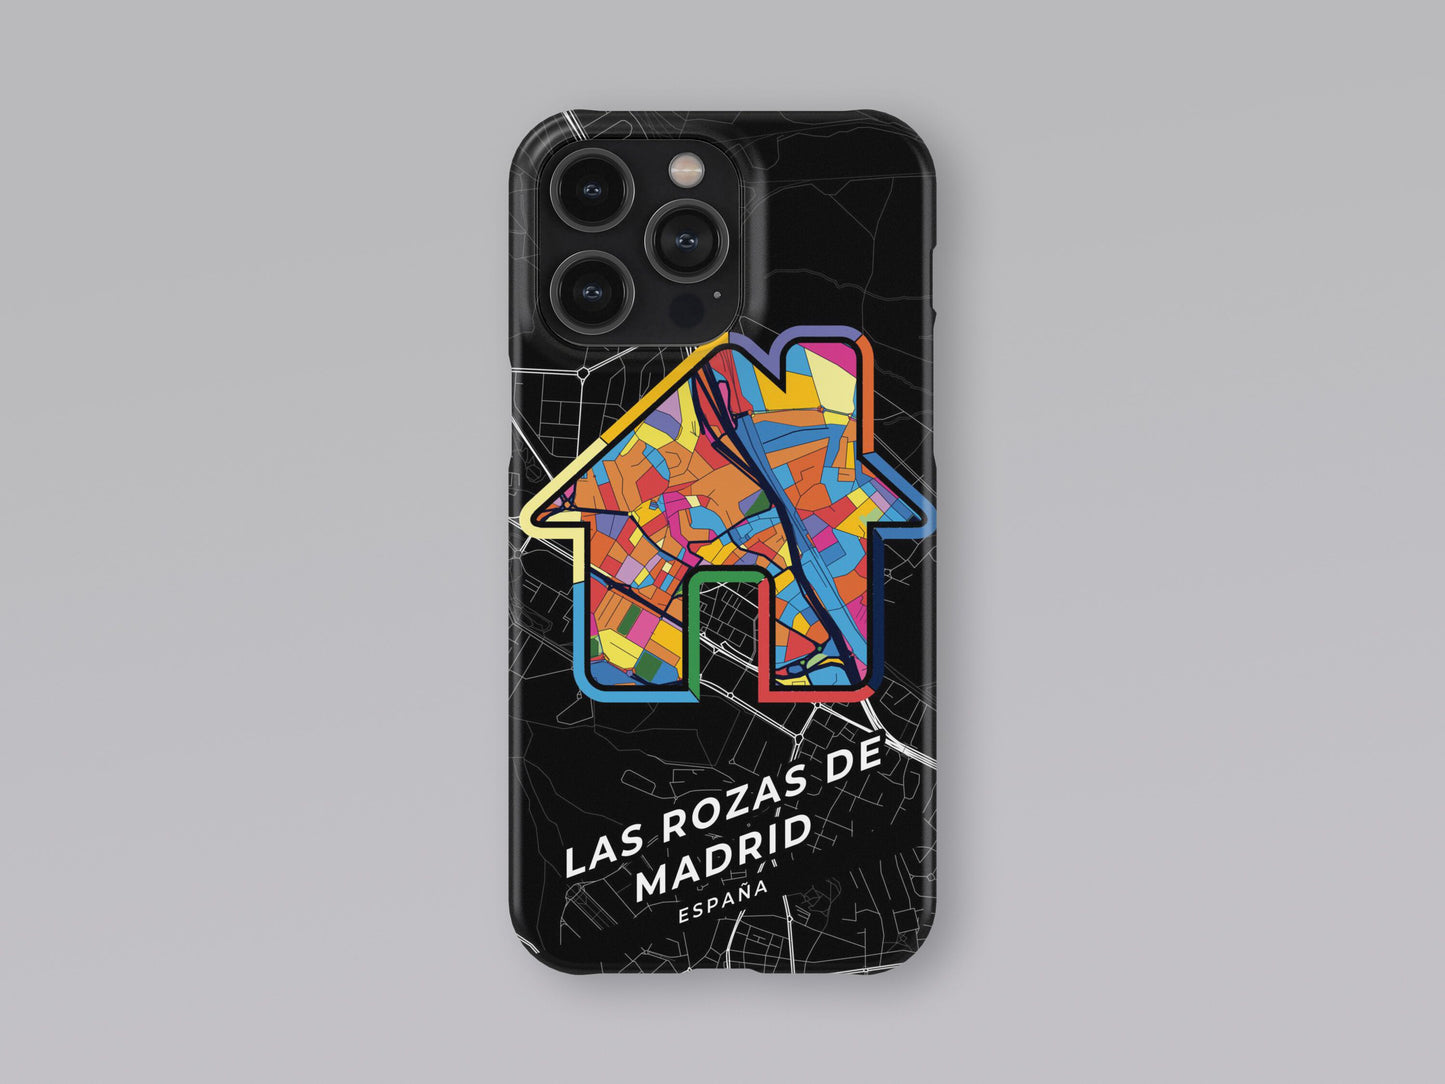 Las Rozas De Madrid Spain slim phone case with colorful icon. Birthday, wedding or housewarming gift. Couple match cases. 3